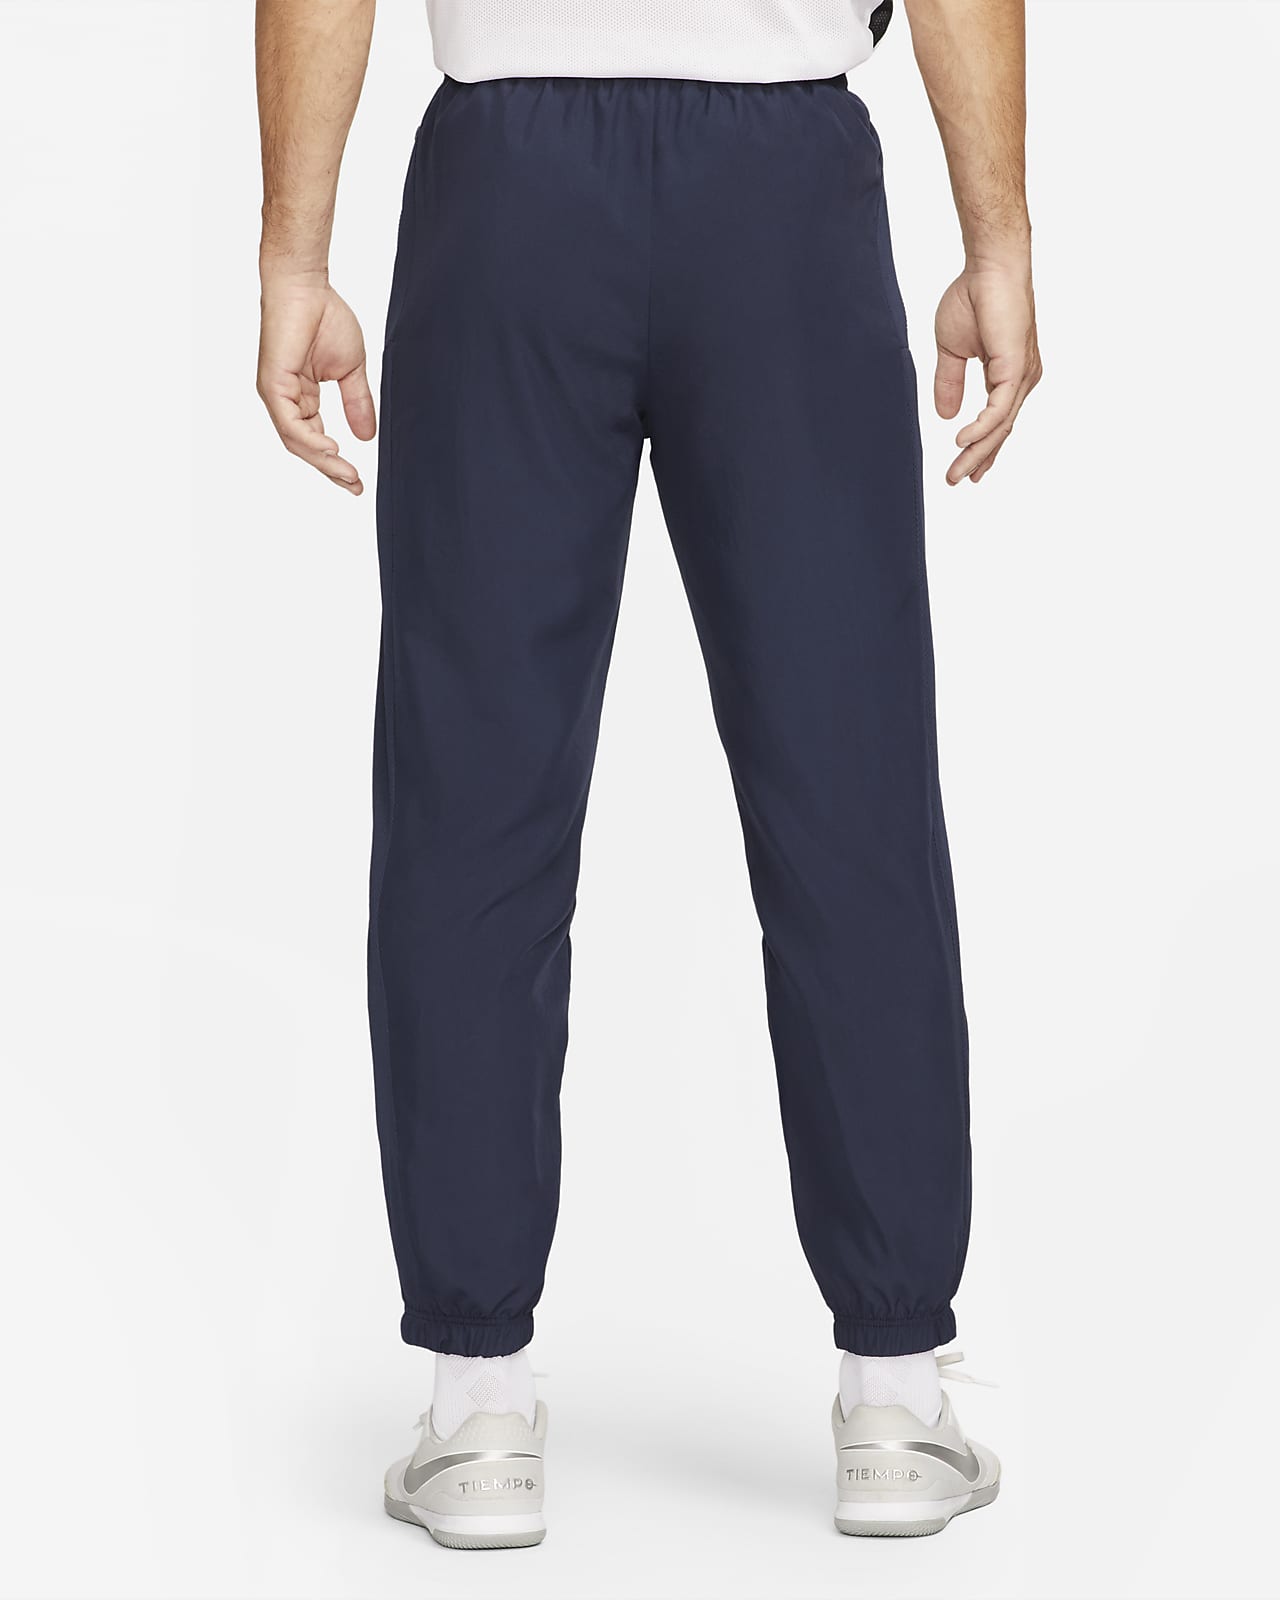 Aggregate 51+ ether track pants best